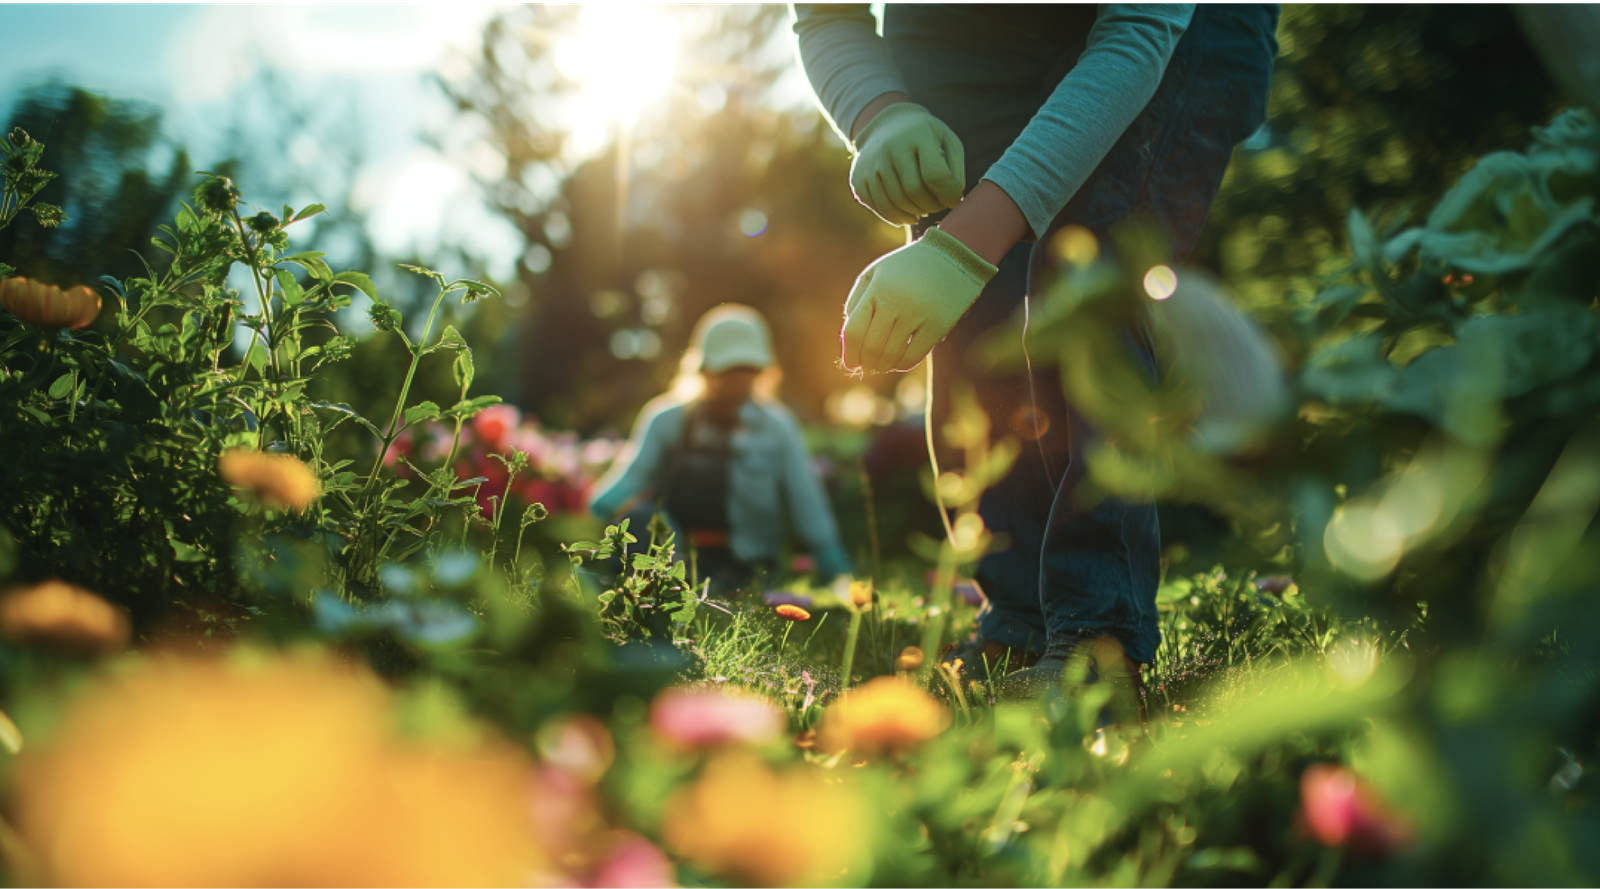 Two people gardening in a sunlit flower garden, focusing on planting and tending to colorful blooms.